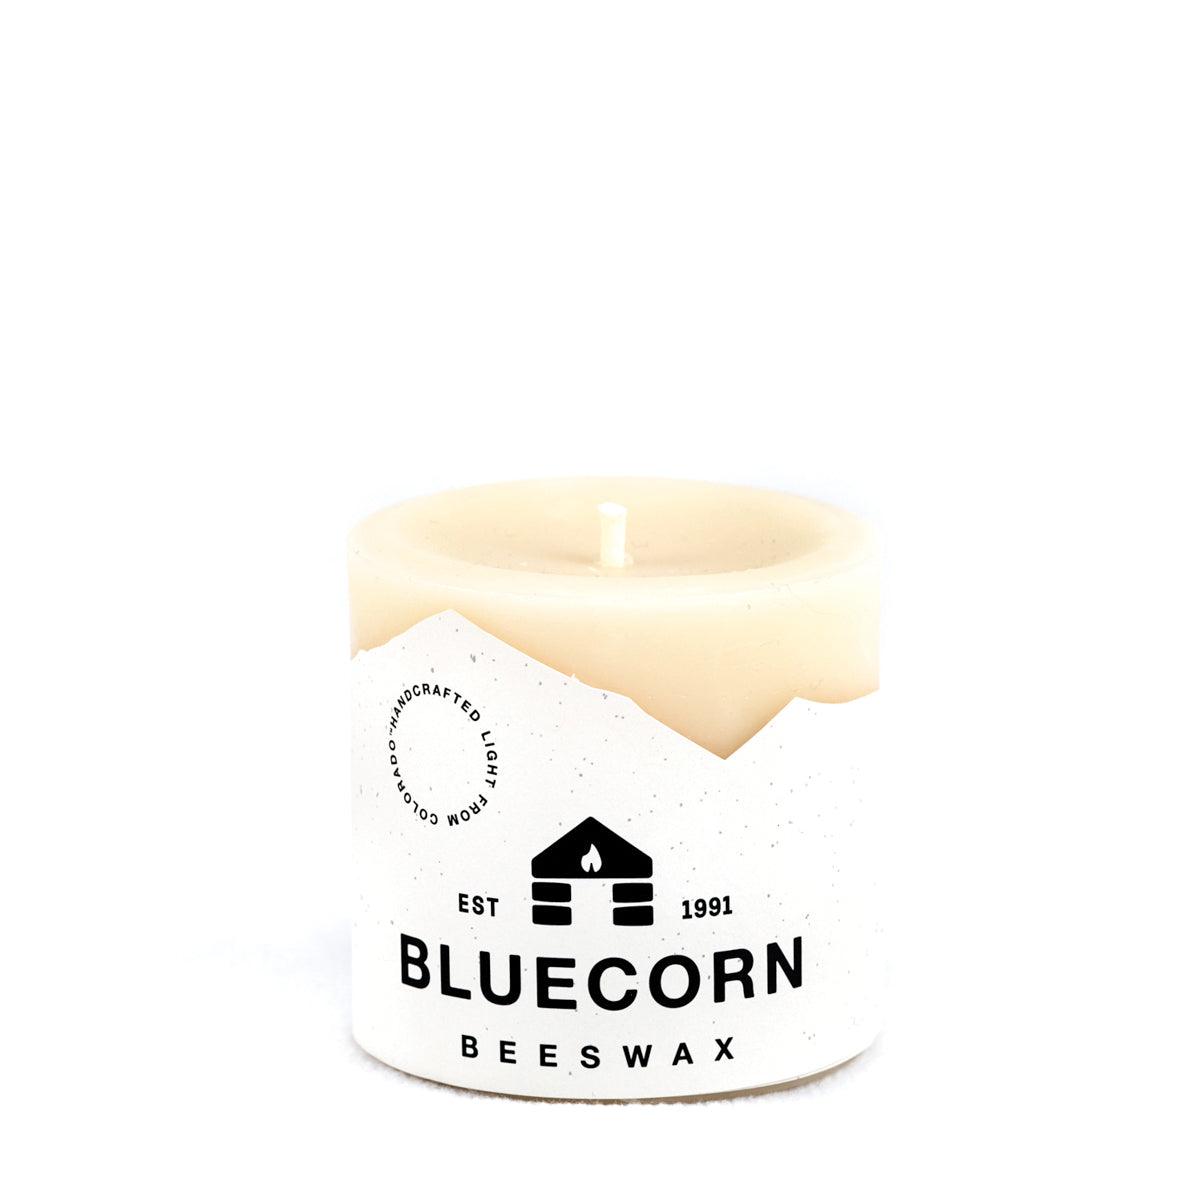 Bluecorn Beeswax 100% Pure Beeswax 3" x 3" Ivory Pillar Candle. Burn Time: 50 hours. Made with 100% Pure Beeswax, is white in color. Made with 100% pure cotton wick, no lead and paraffin free. Clean burning and non-toxic. Features Bluecorn Beeswax label printed on 100% recycled paper.